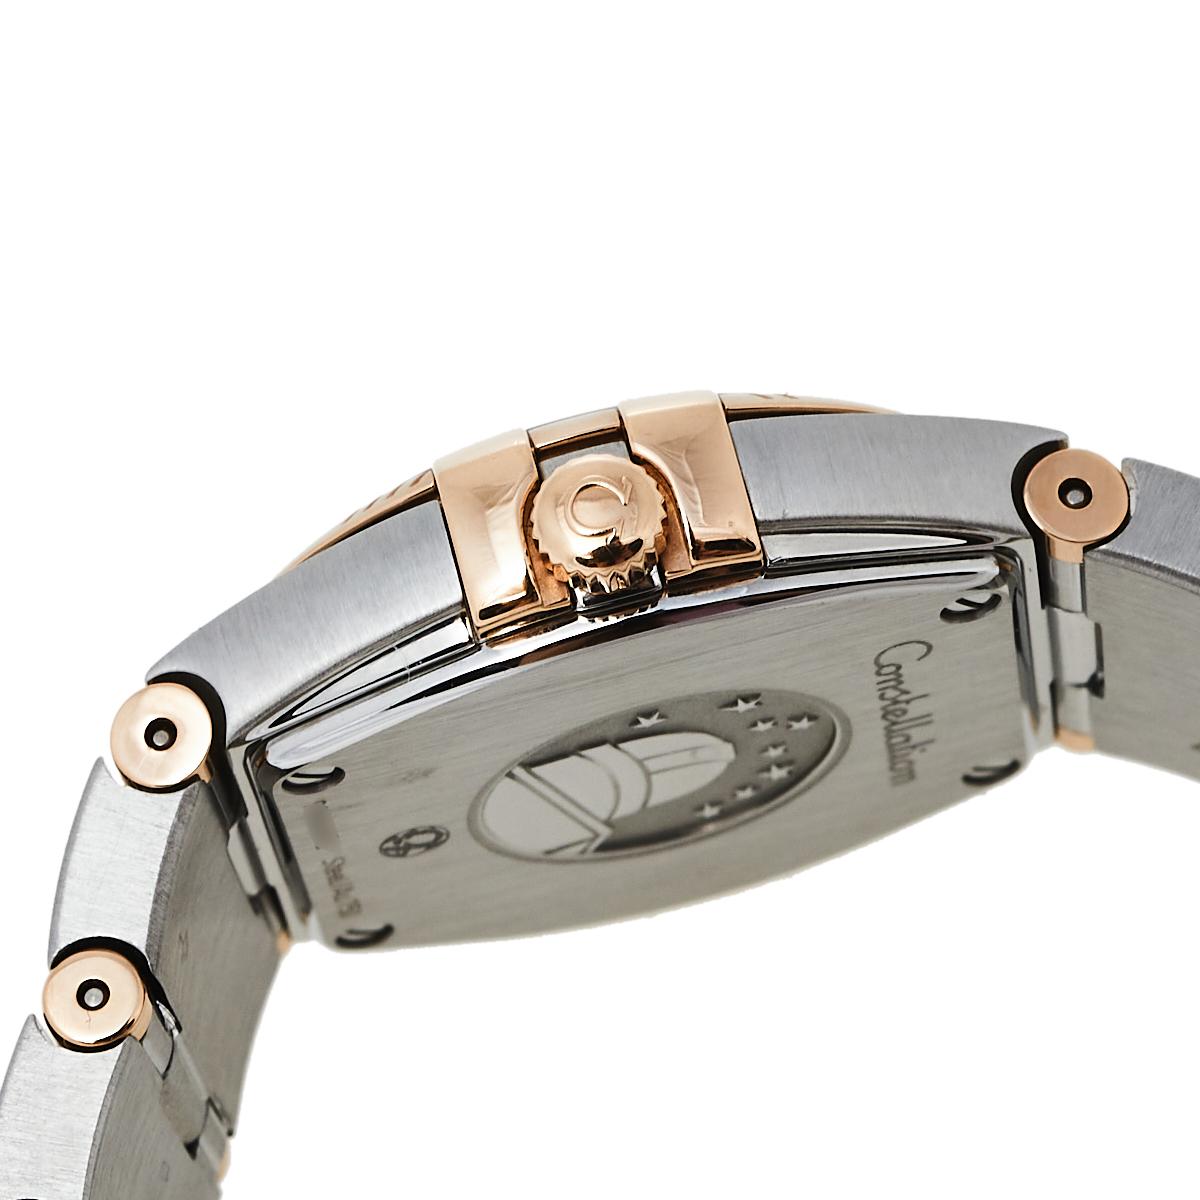 An icon from Omega, this Constellation Quartz watch for women is cast in stainless steel and 18 rose gold. It has Roman numerals engraved on the bezel and a magnificent Mother of Pearl dial that holds our gaze. Set on the round dial are two gold